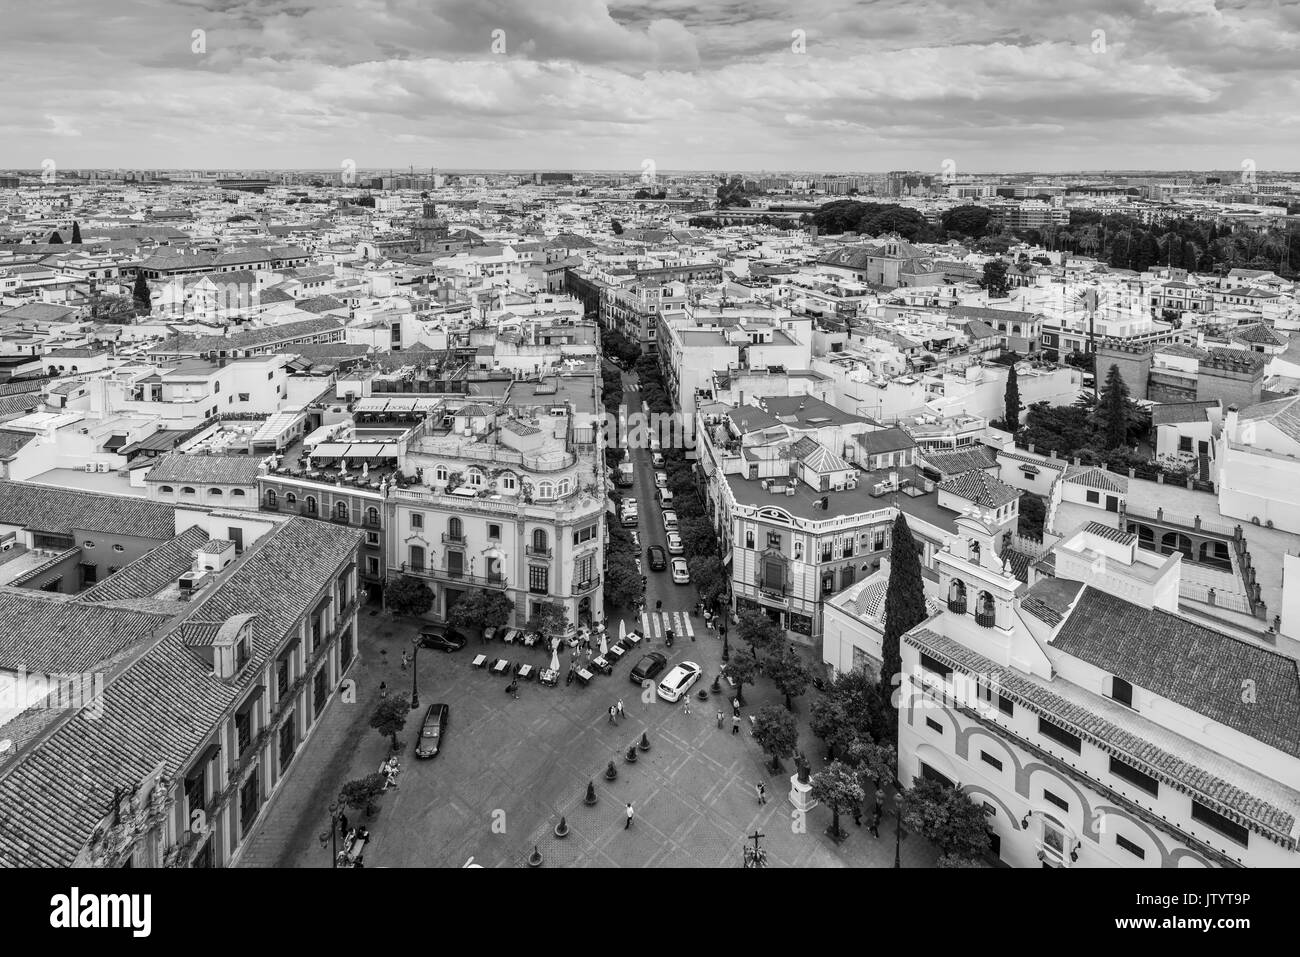 Seville, Spain - May 20, 2014: Aerial view of Sevilla, Spain, taken from Giralda tower in cloudy weather. Black and white photography. Stock Photo